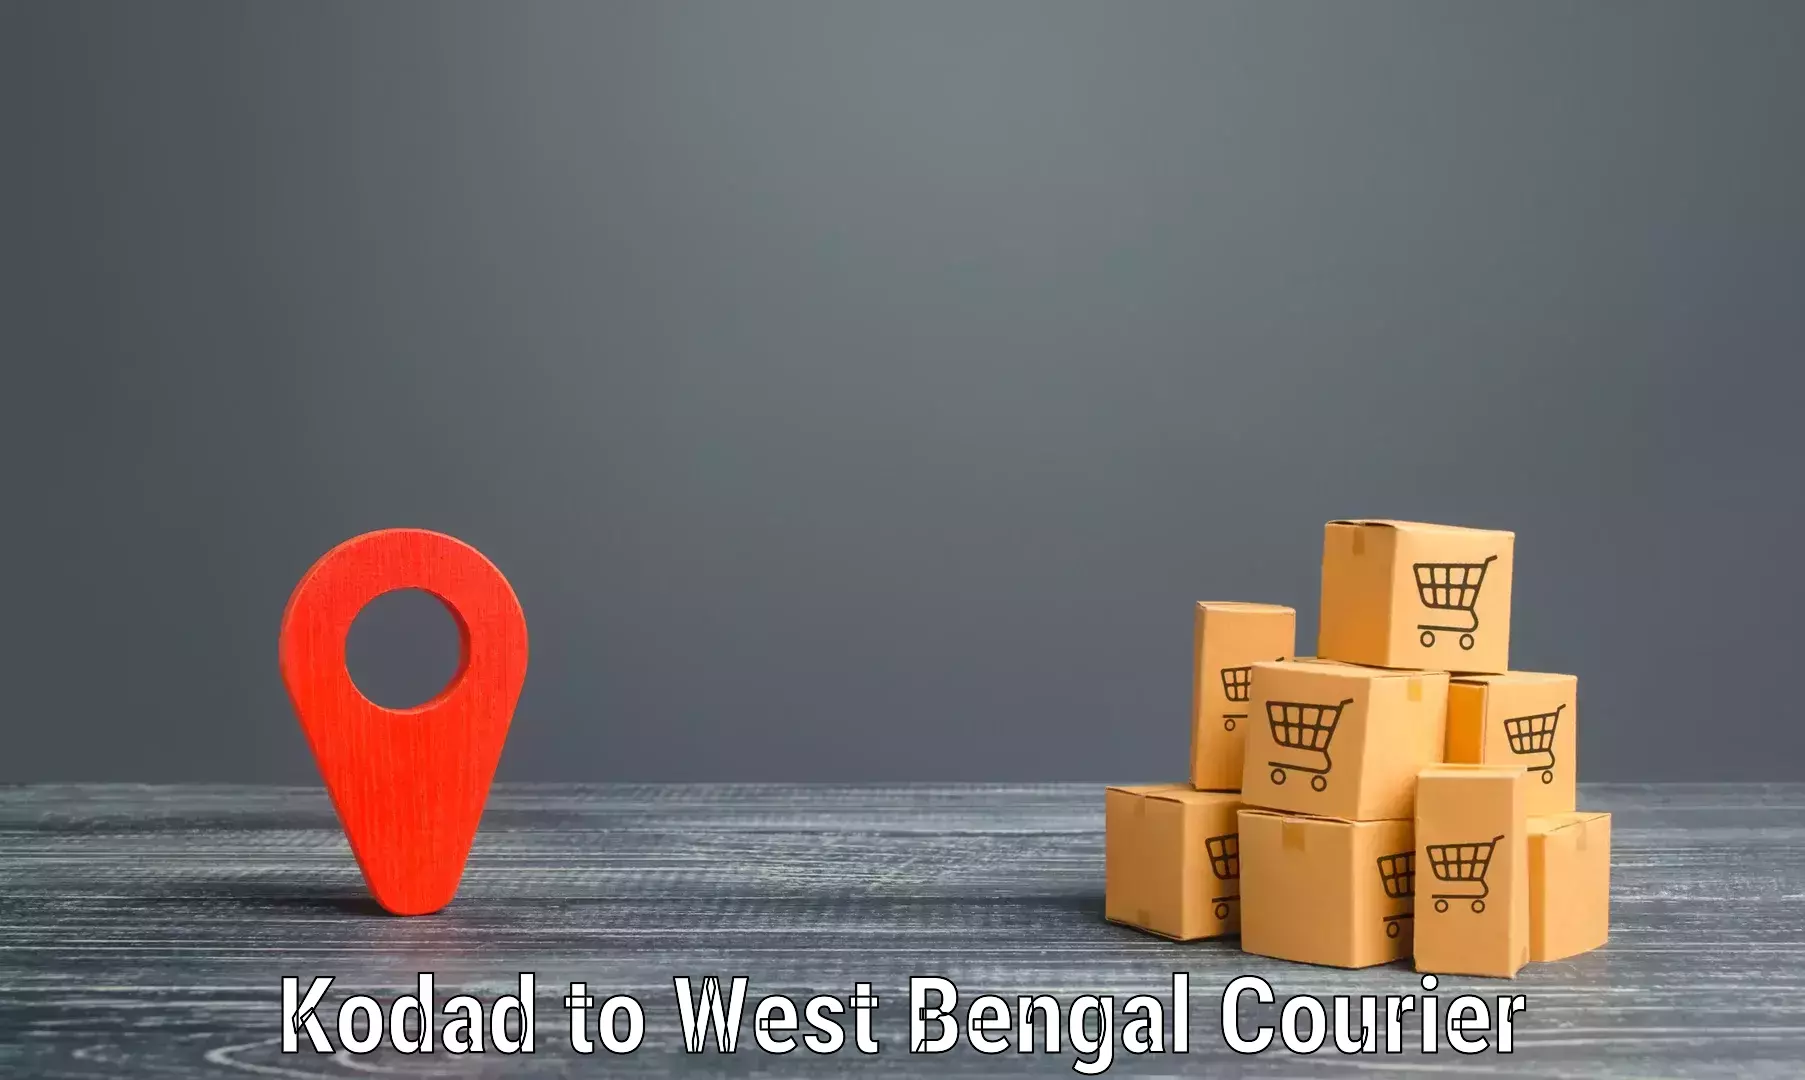 Courier service booking in Kodad to Mirzapur Bardhaman